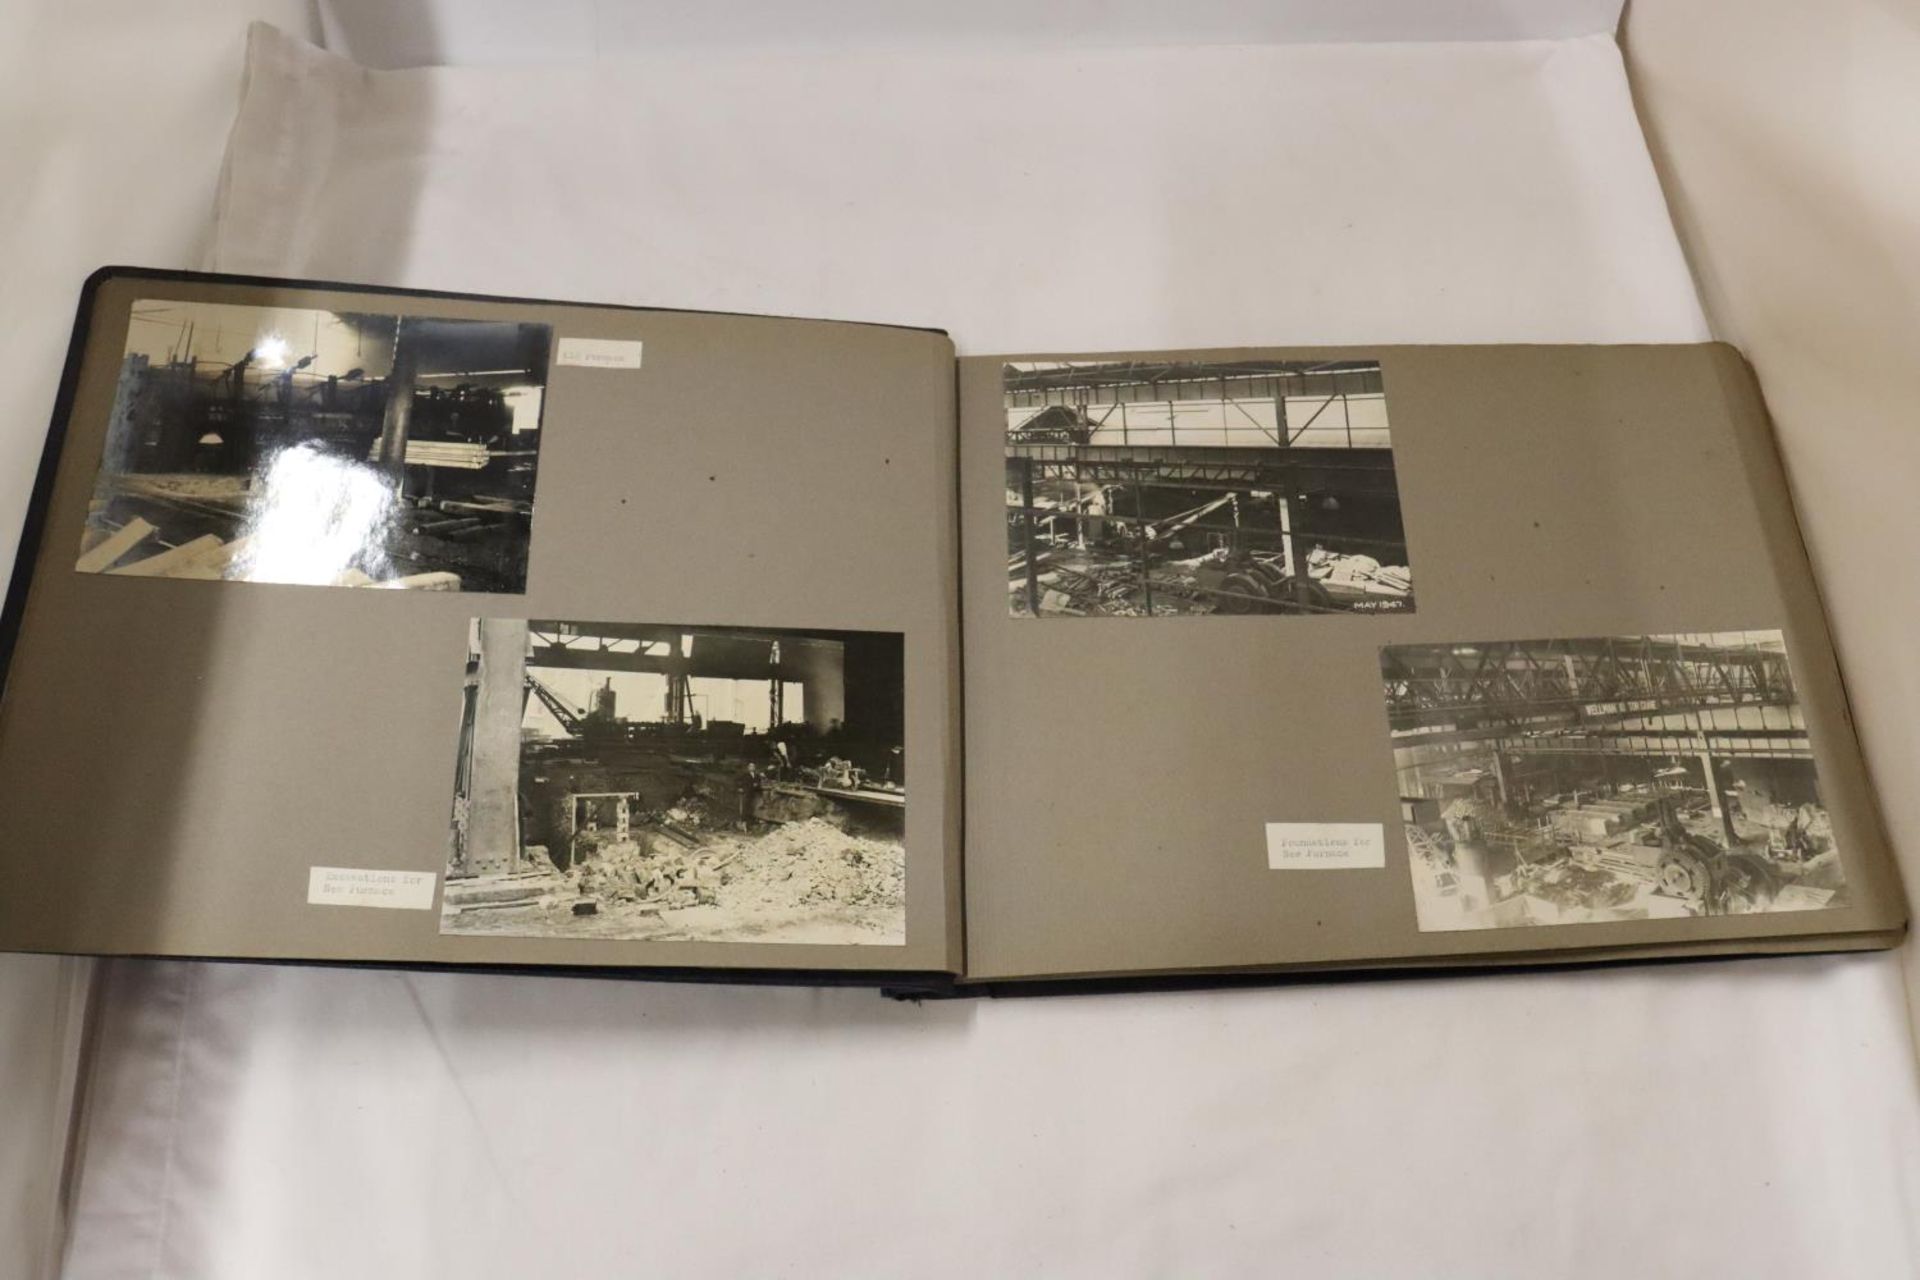 AN INDUSTRIAL PHOTO ALBUM FROM 1946 FULL OF POST WAR RENOVATIONS - Image 3 of 3